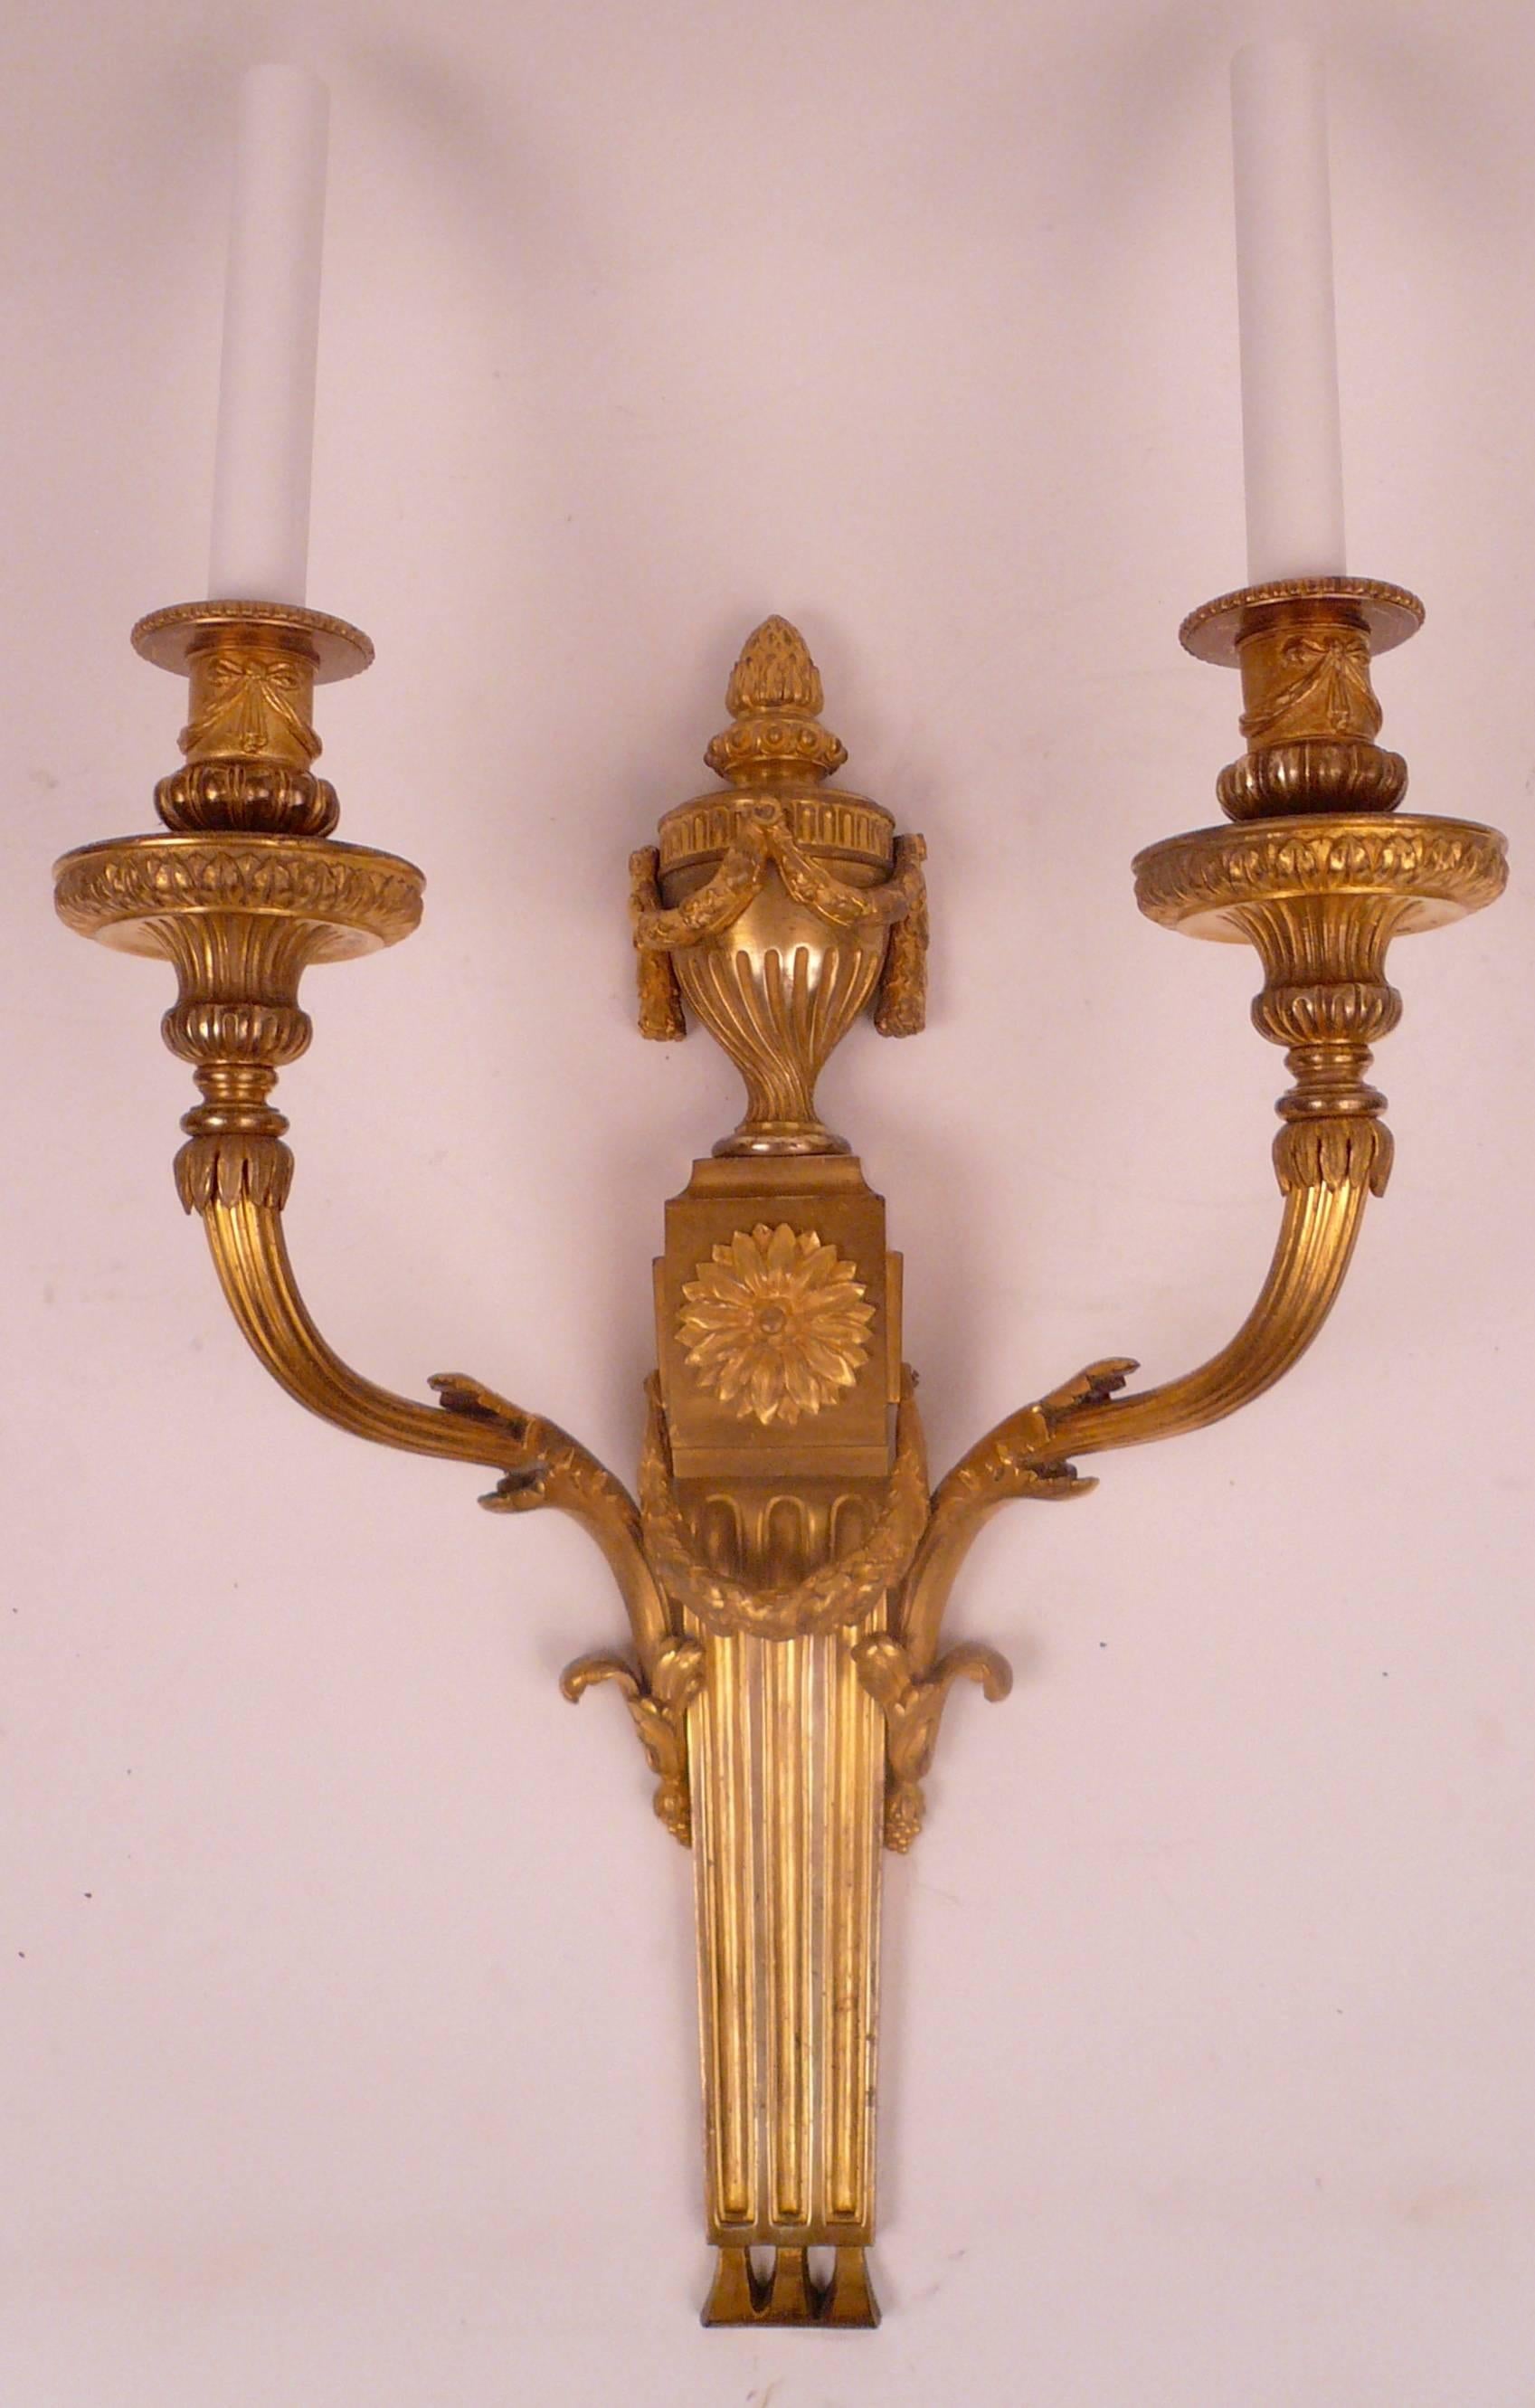 This handsome pair of caldwell two-light bronze sconces are finely detailed, and have their original finish.